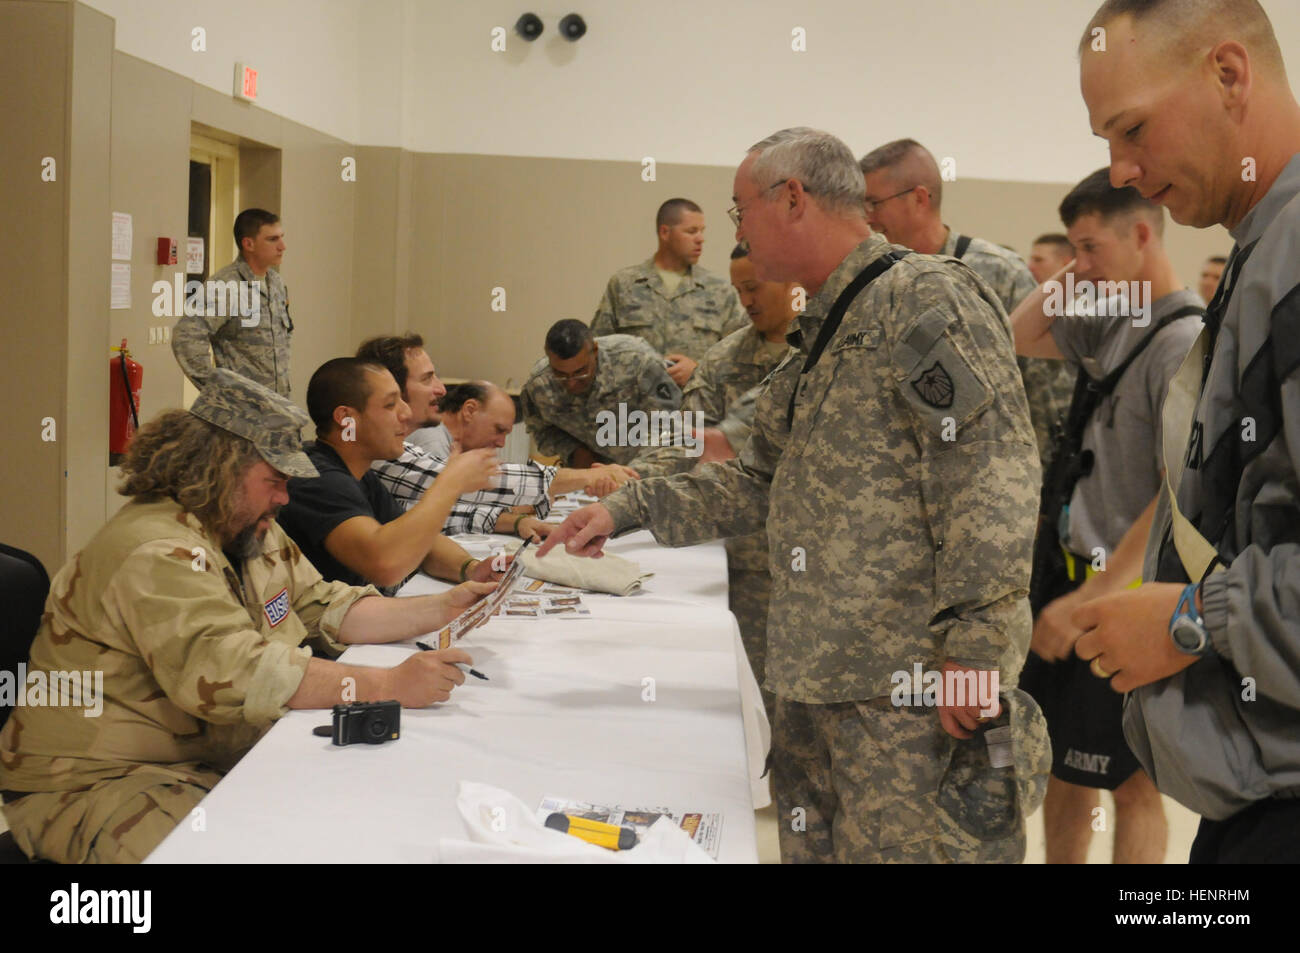 Cast members of the FX show 'Sons of Anarchy' sign autographs for service members during a meet and greet, March 16, at Joint Base Balad, Iraq. 'Sons of Anarchy' actors visit Taji, JBB 261237 Stock Photo